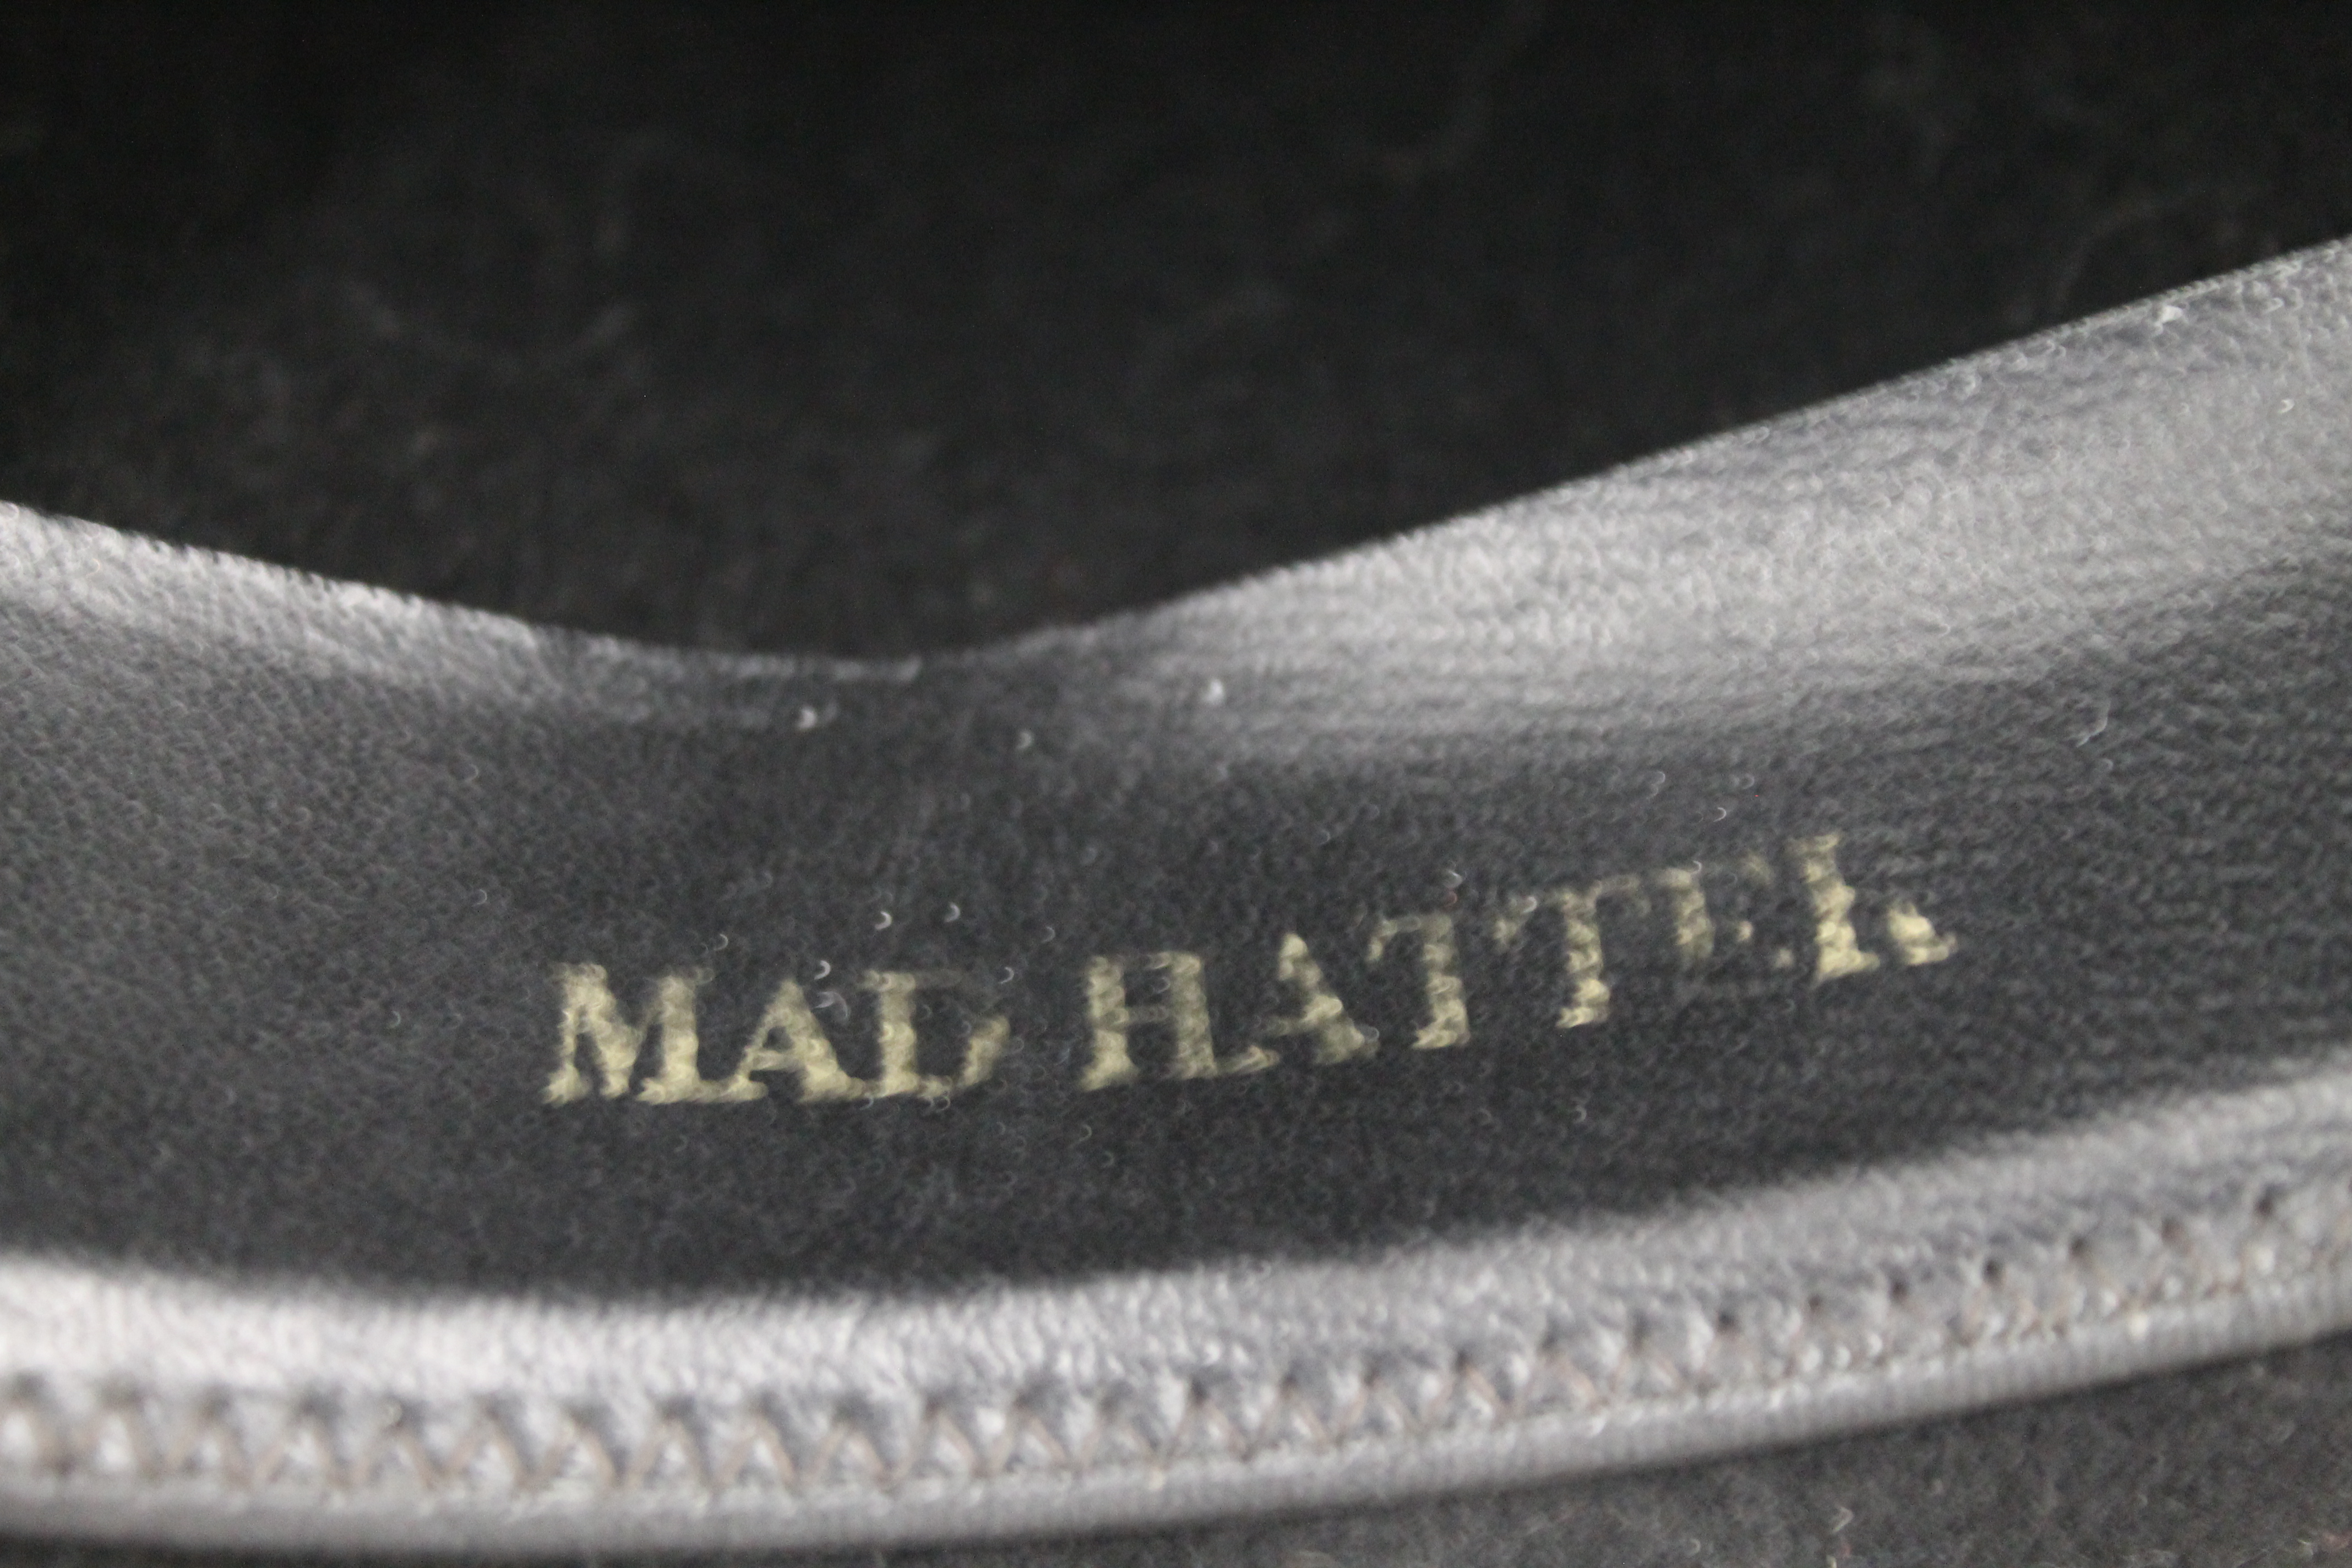 A Dorfman Pacific 'Mad Hatter' wool top hat. Approximate size 7 1/2. - Image 3 of 3